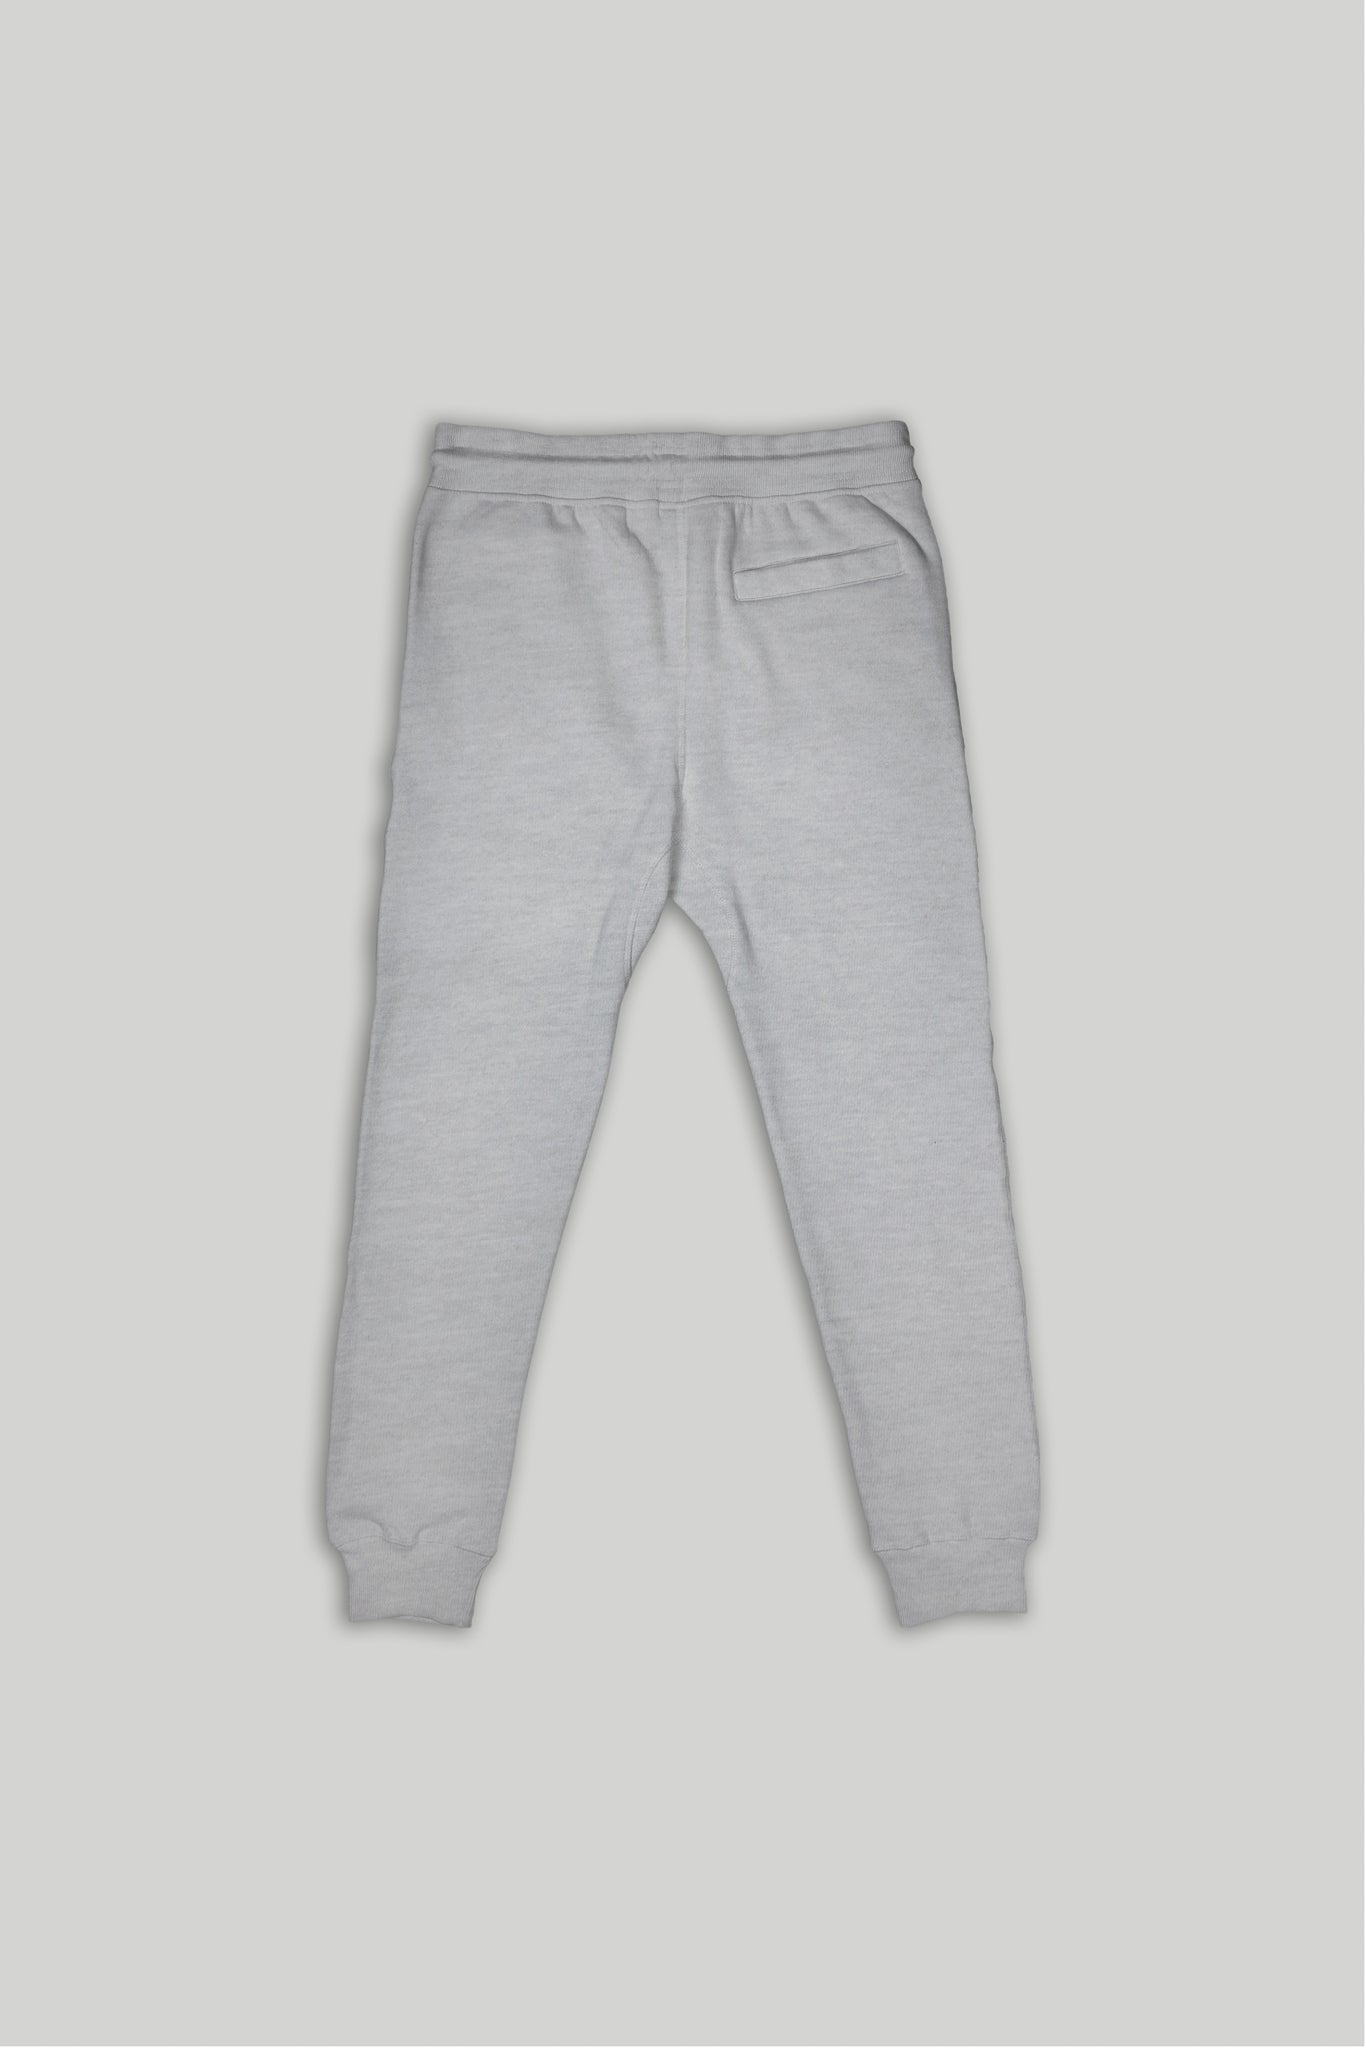 High quality fleece joggers are perfect for any season outfit.